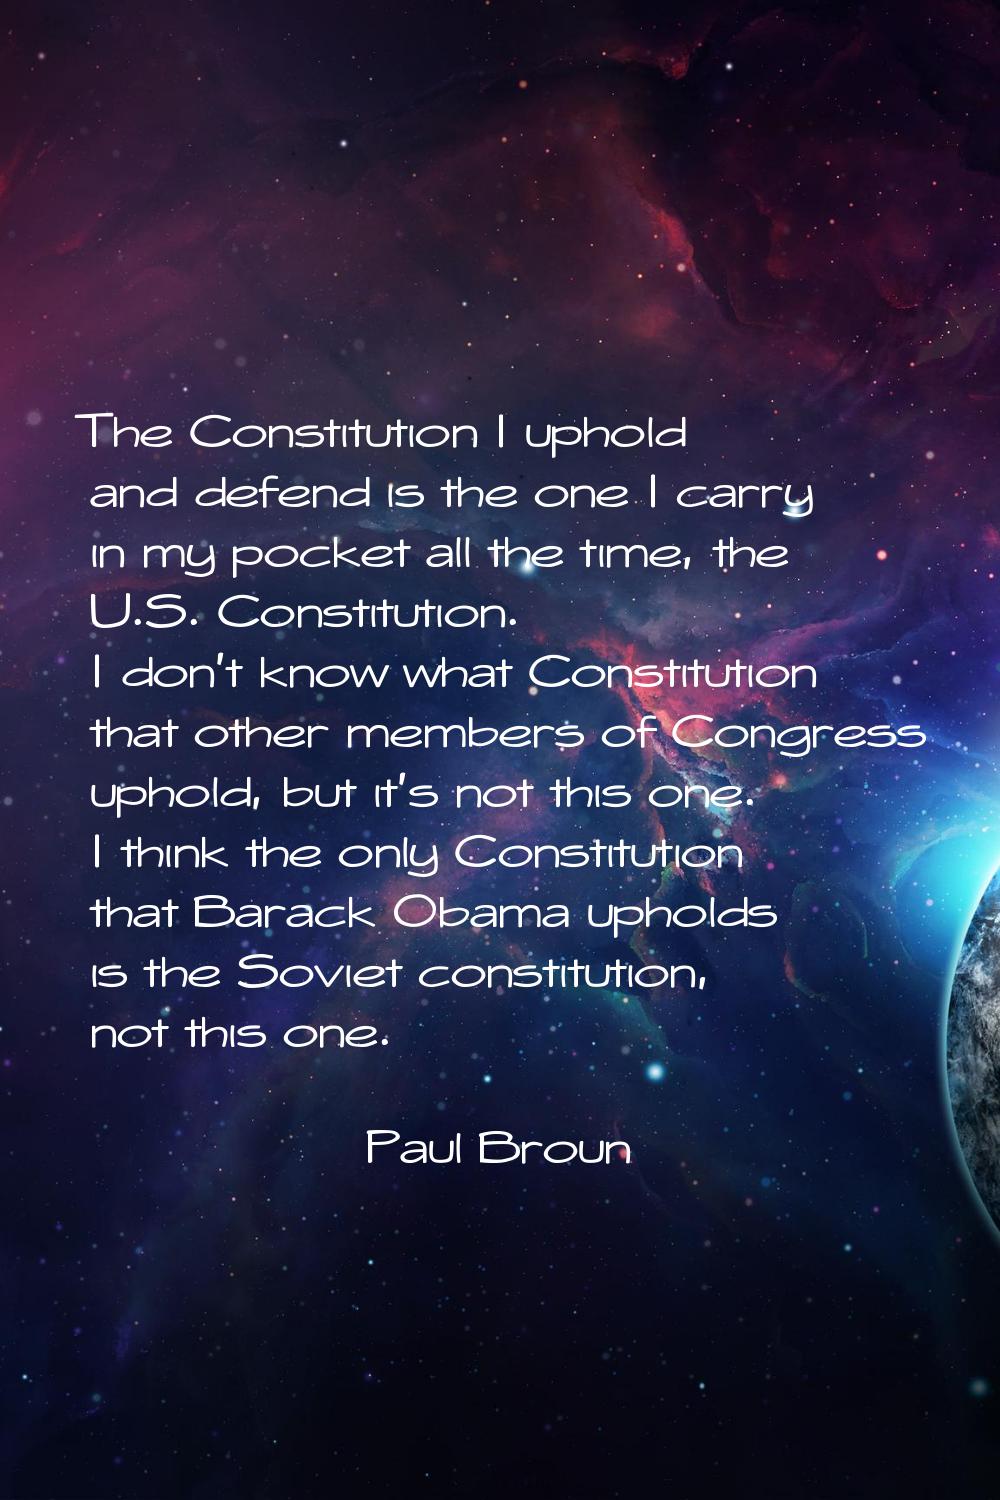 The Constitution I uphold and defend is the one I carry in my pocket all the time, the U.S. Constit